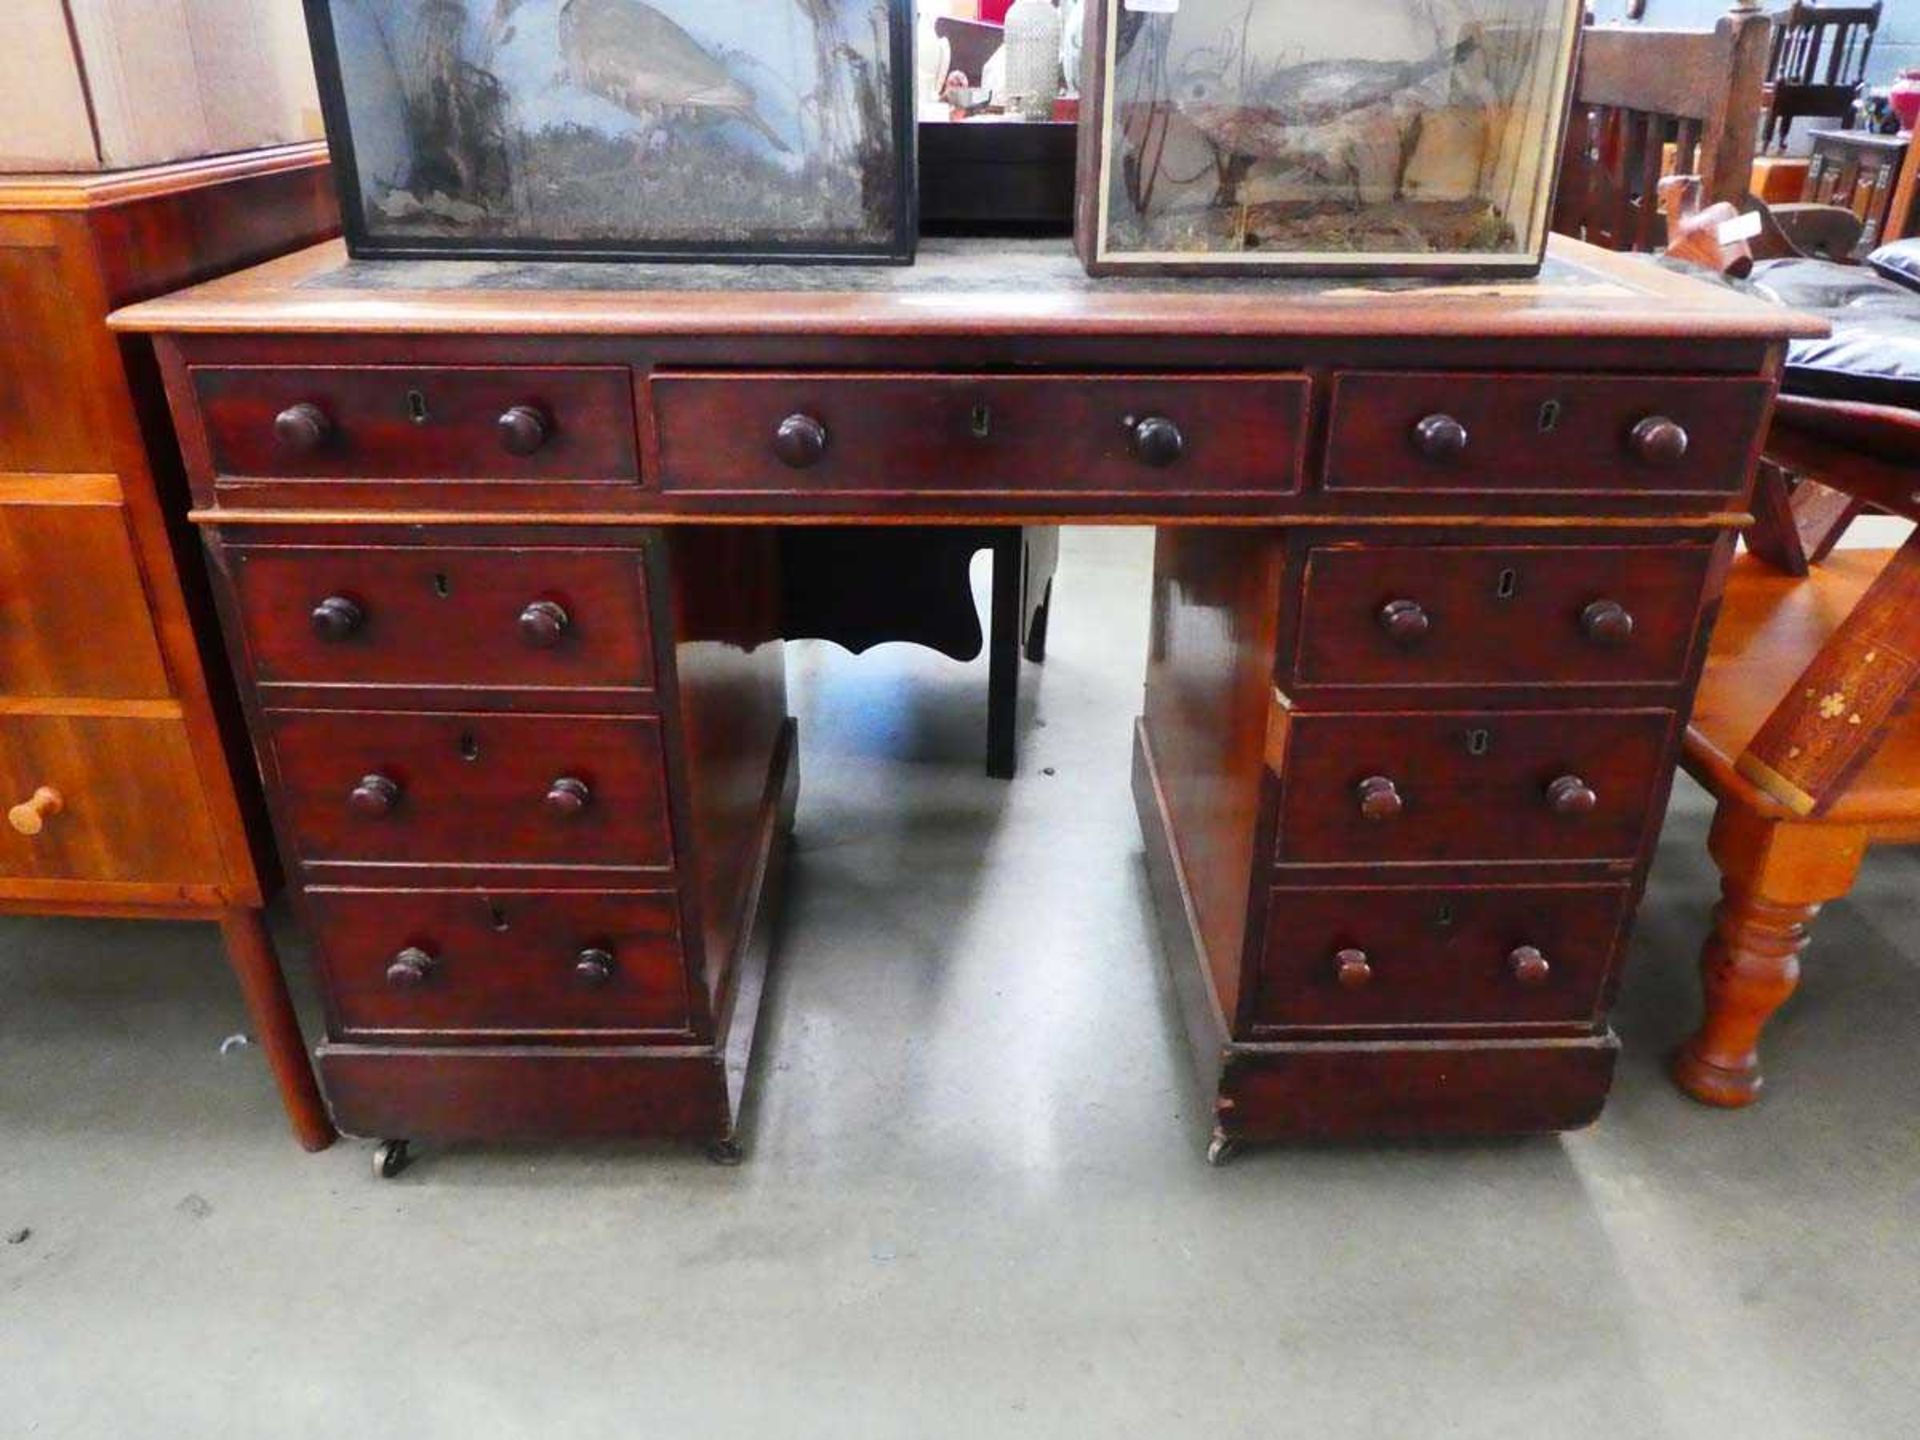 Late Victorian twin pedestal desk Damage to the surface and missing veneer